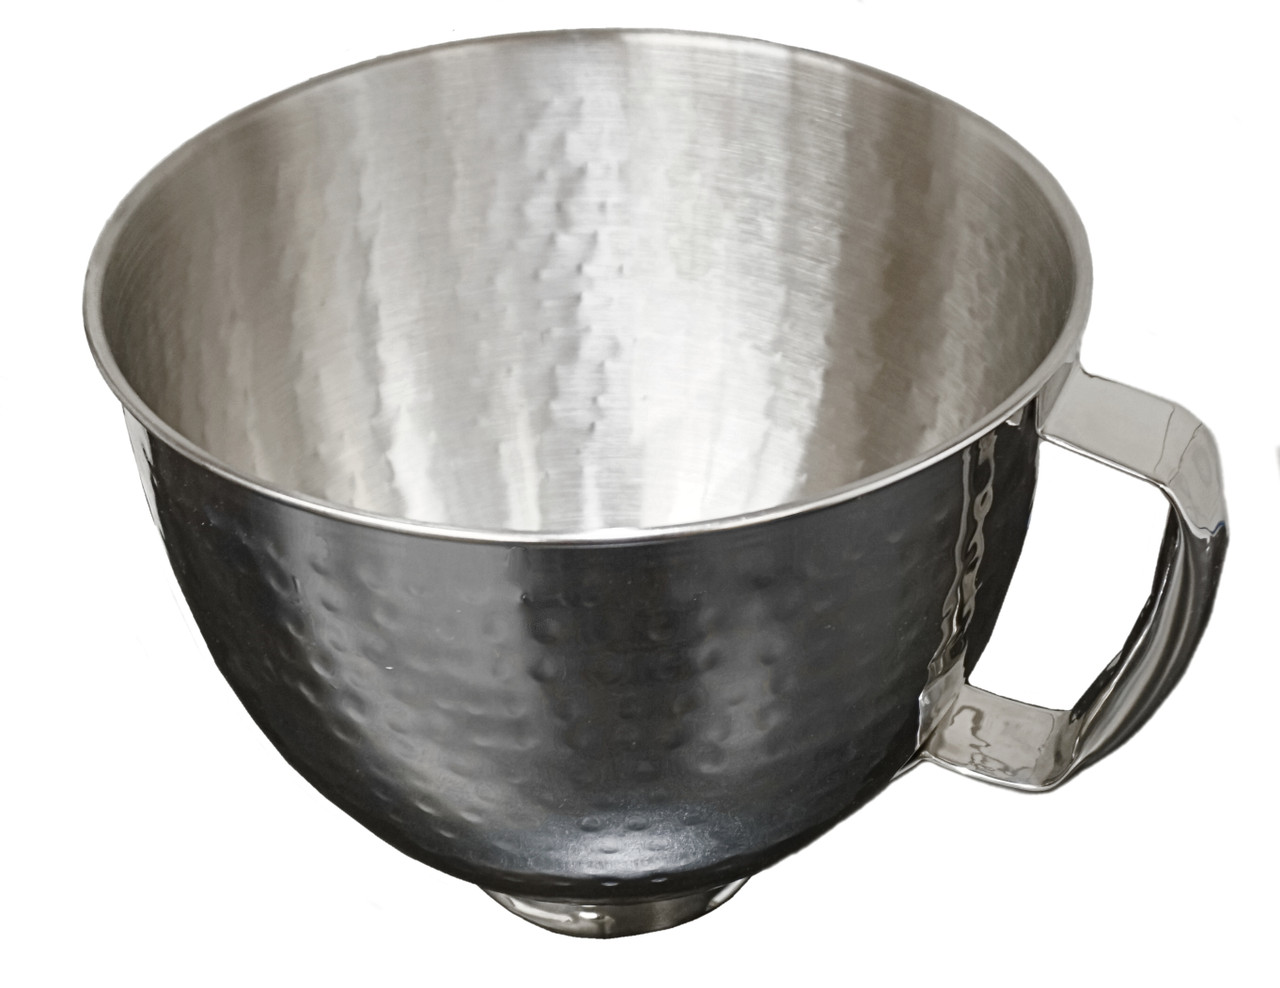 KitchenAid K5THSBP Stainless Steel 5 Qt. Mixing Bowl with Handle